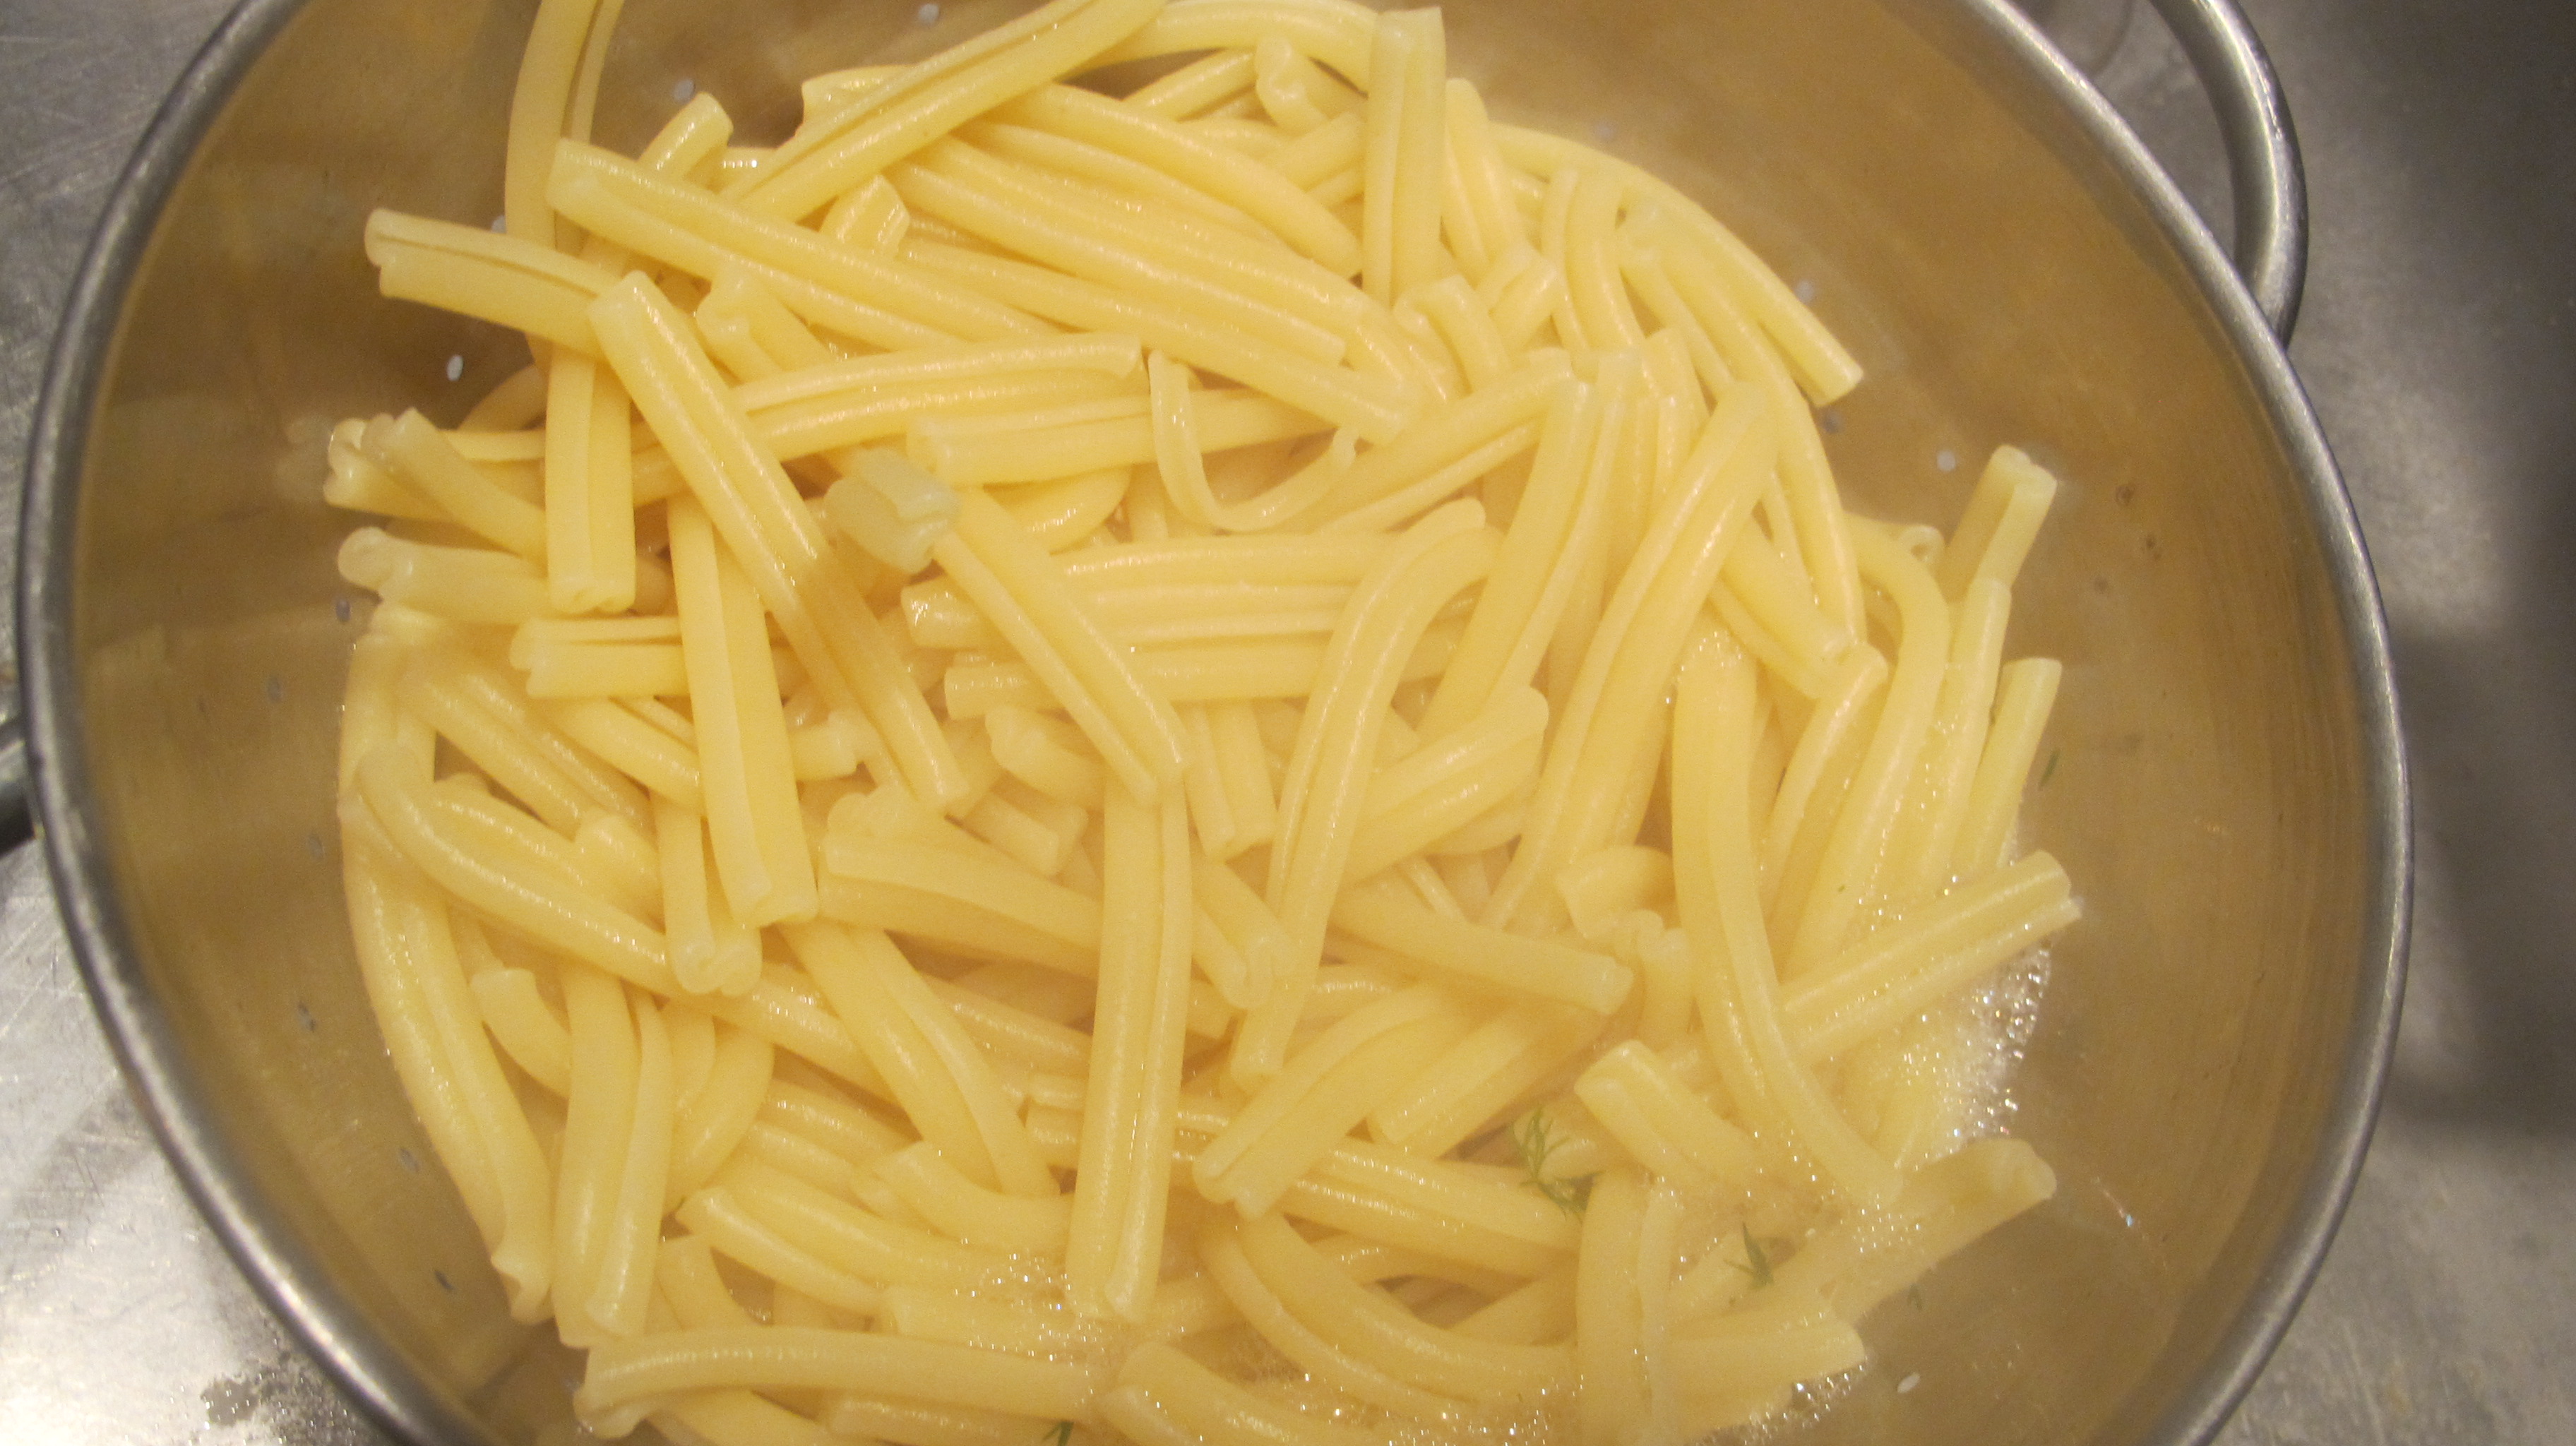 I used "strozzapreti" pasta. The translation to english is "choked preist". It may be difficult to find in stores. 